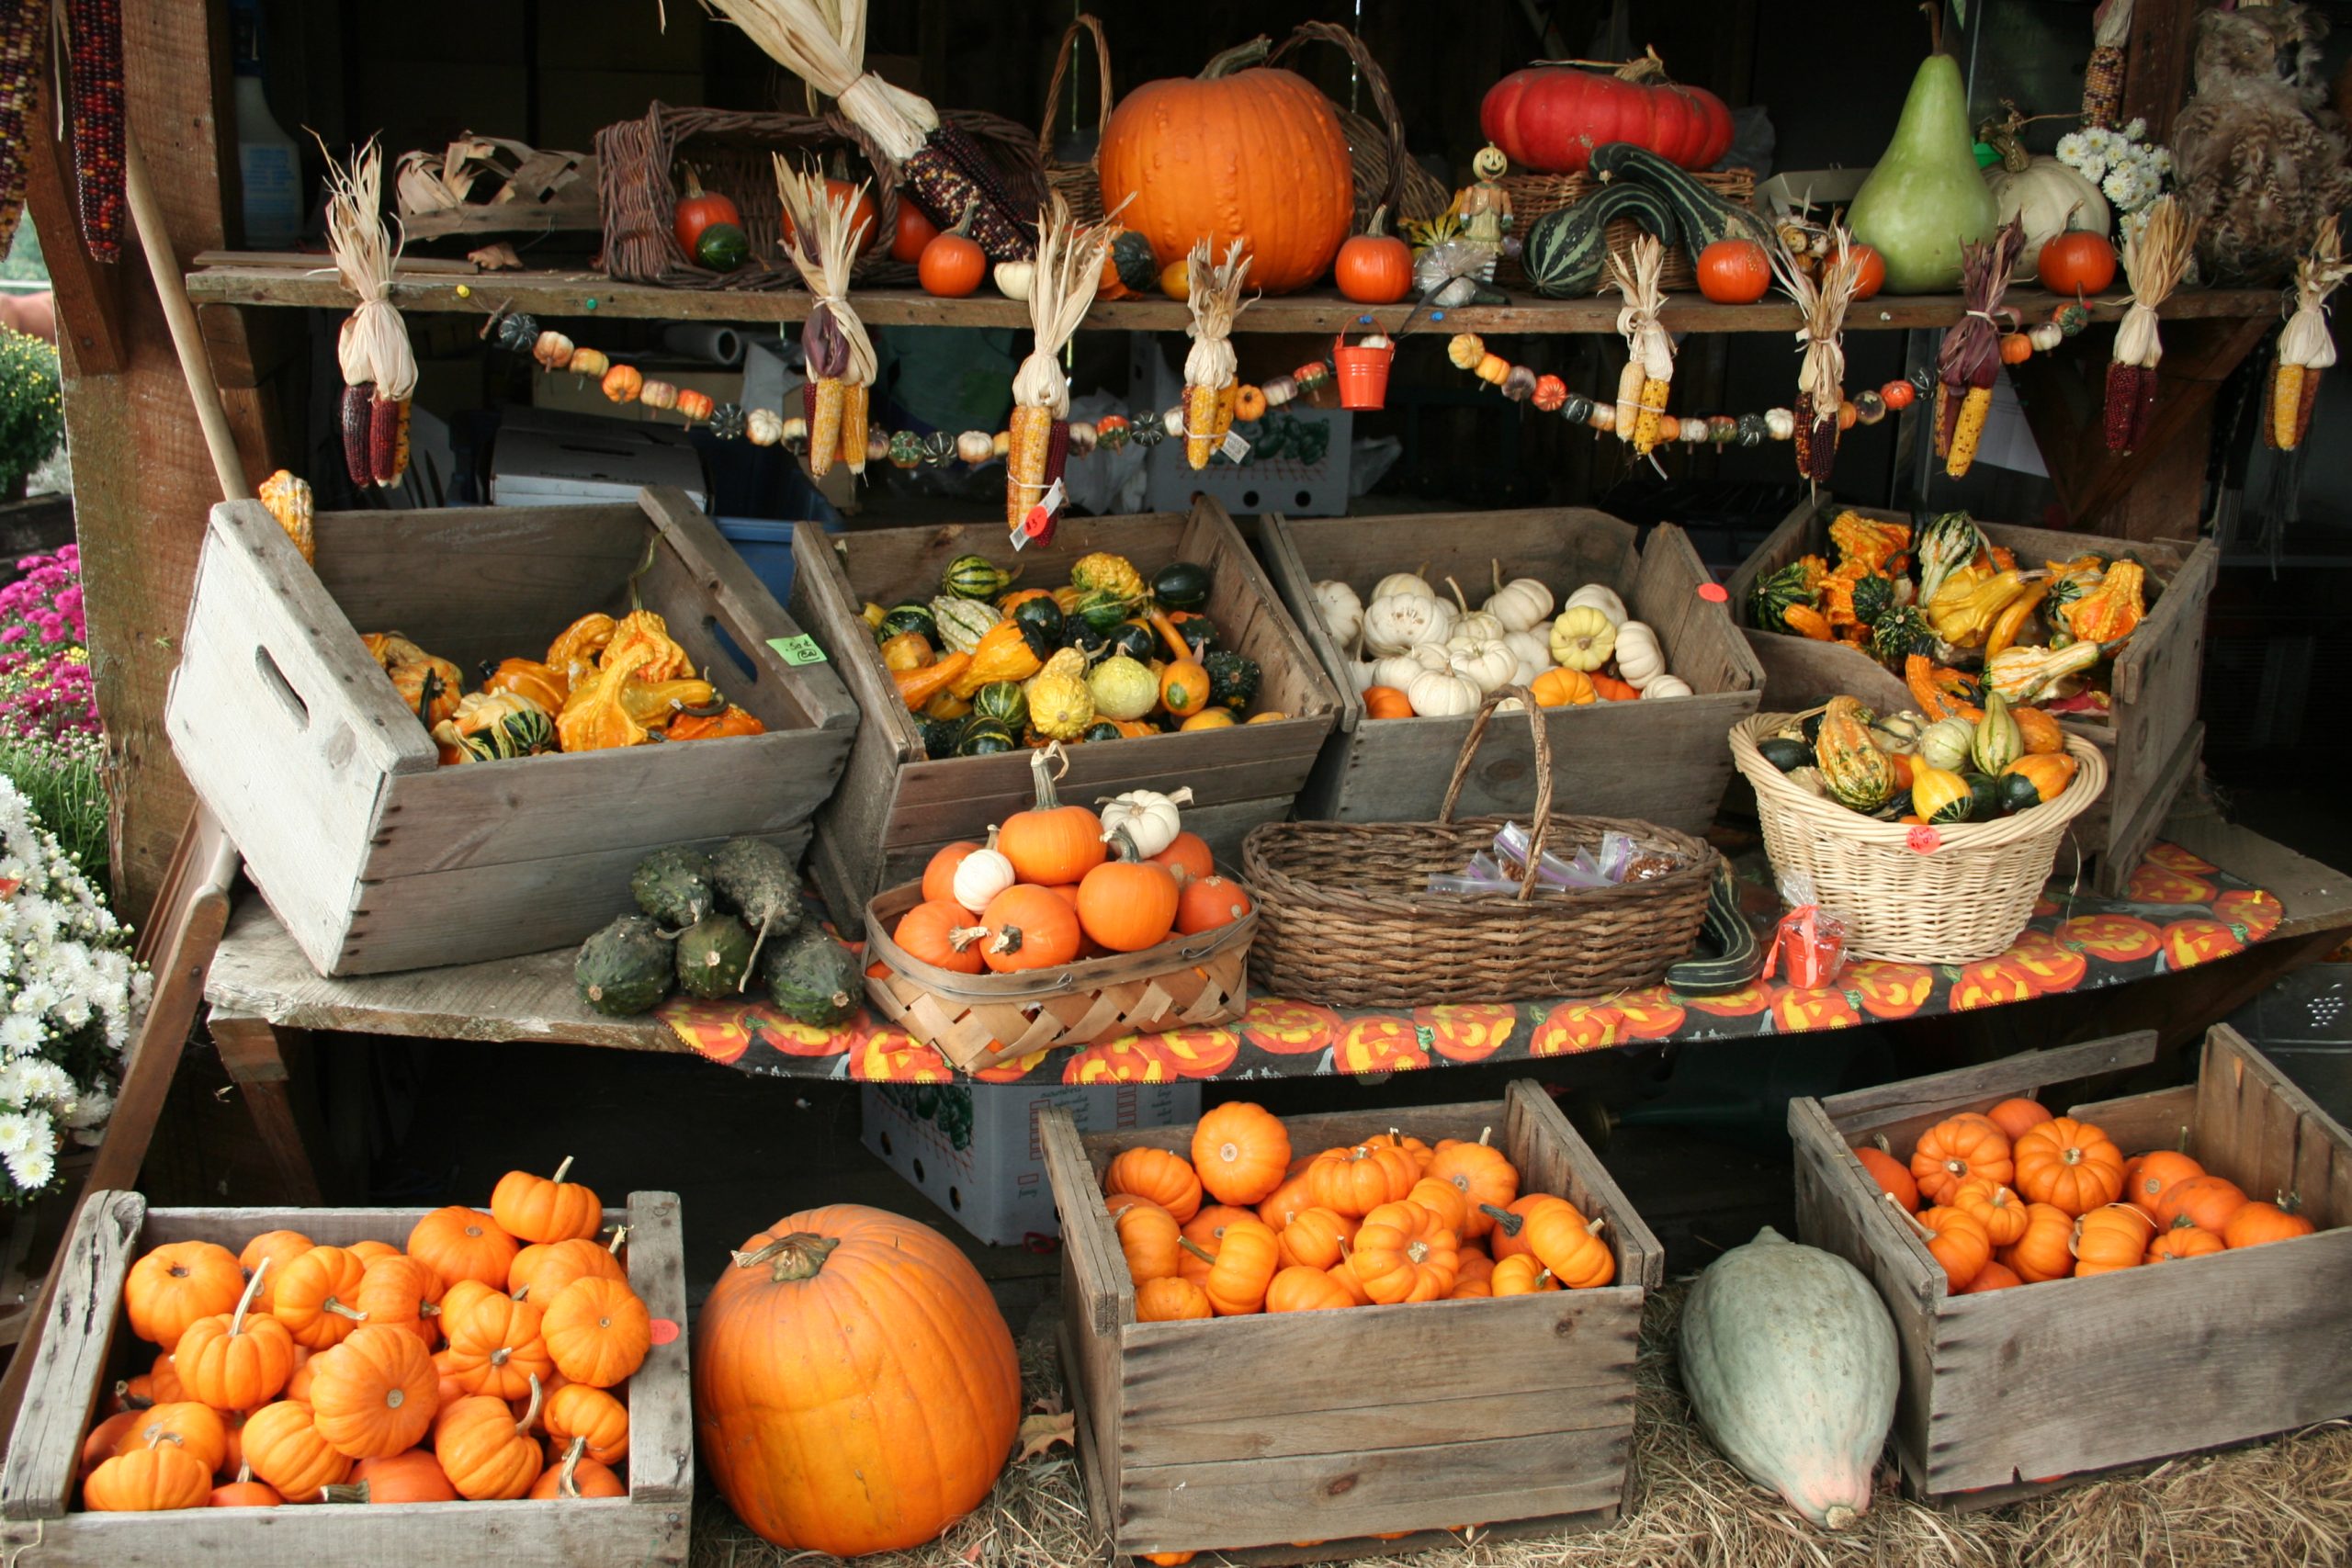 Selection of Gourds (user submitted)